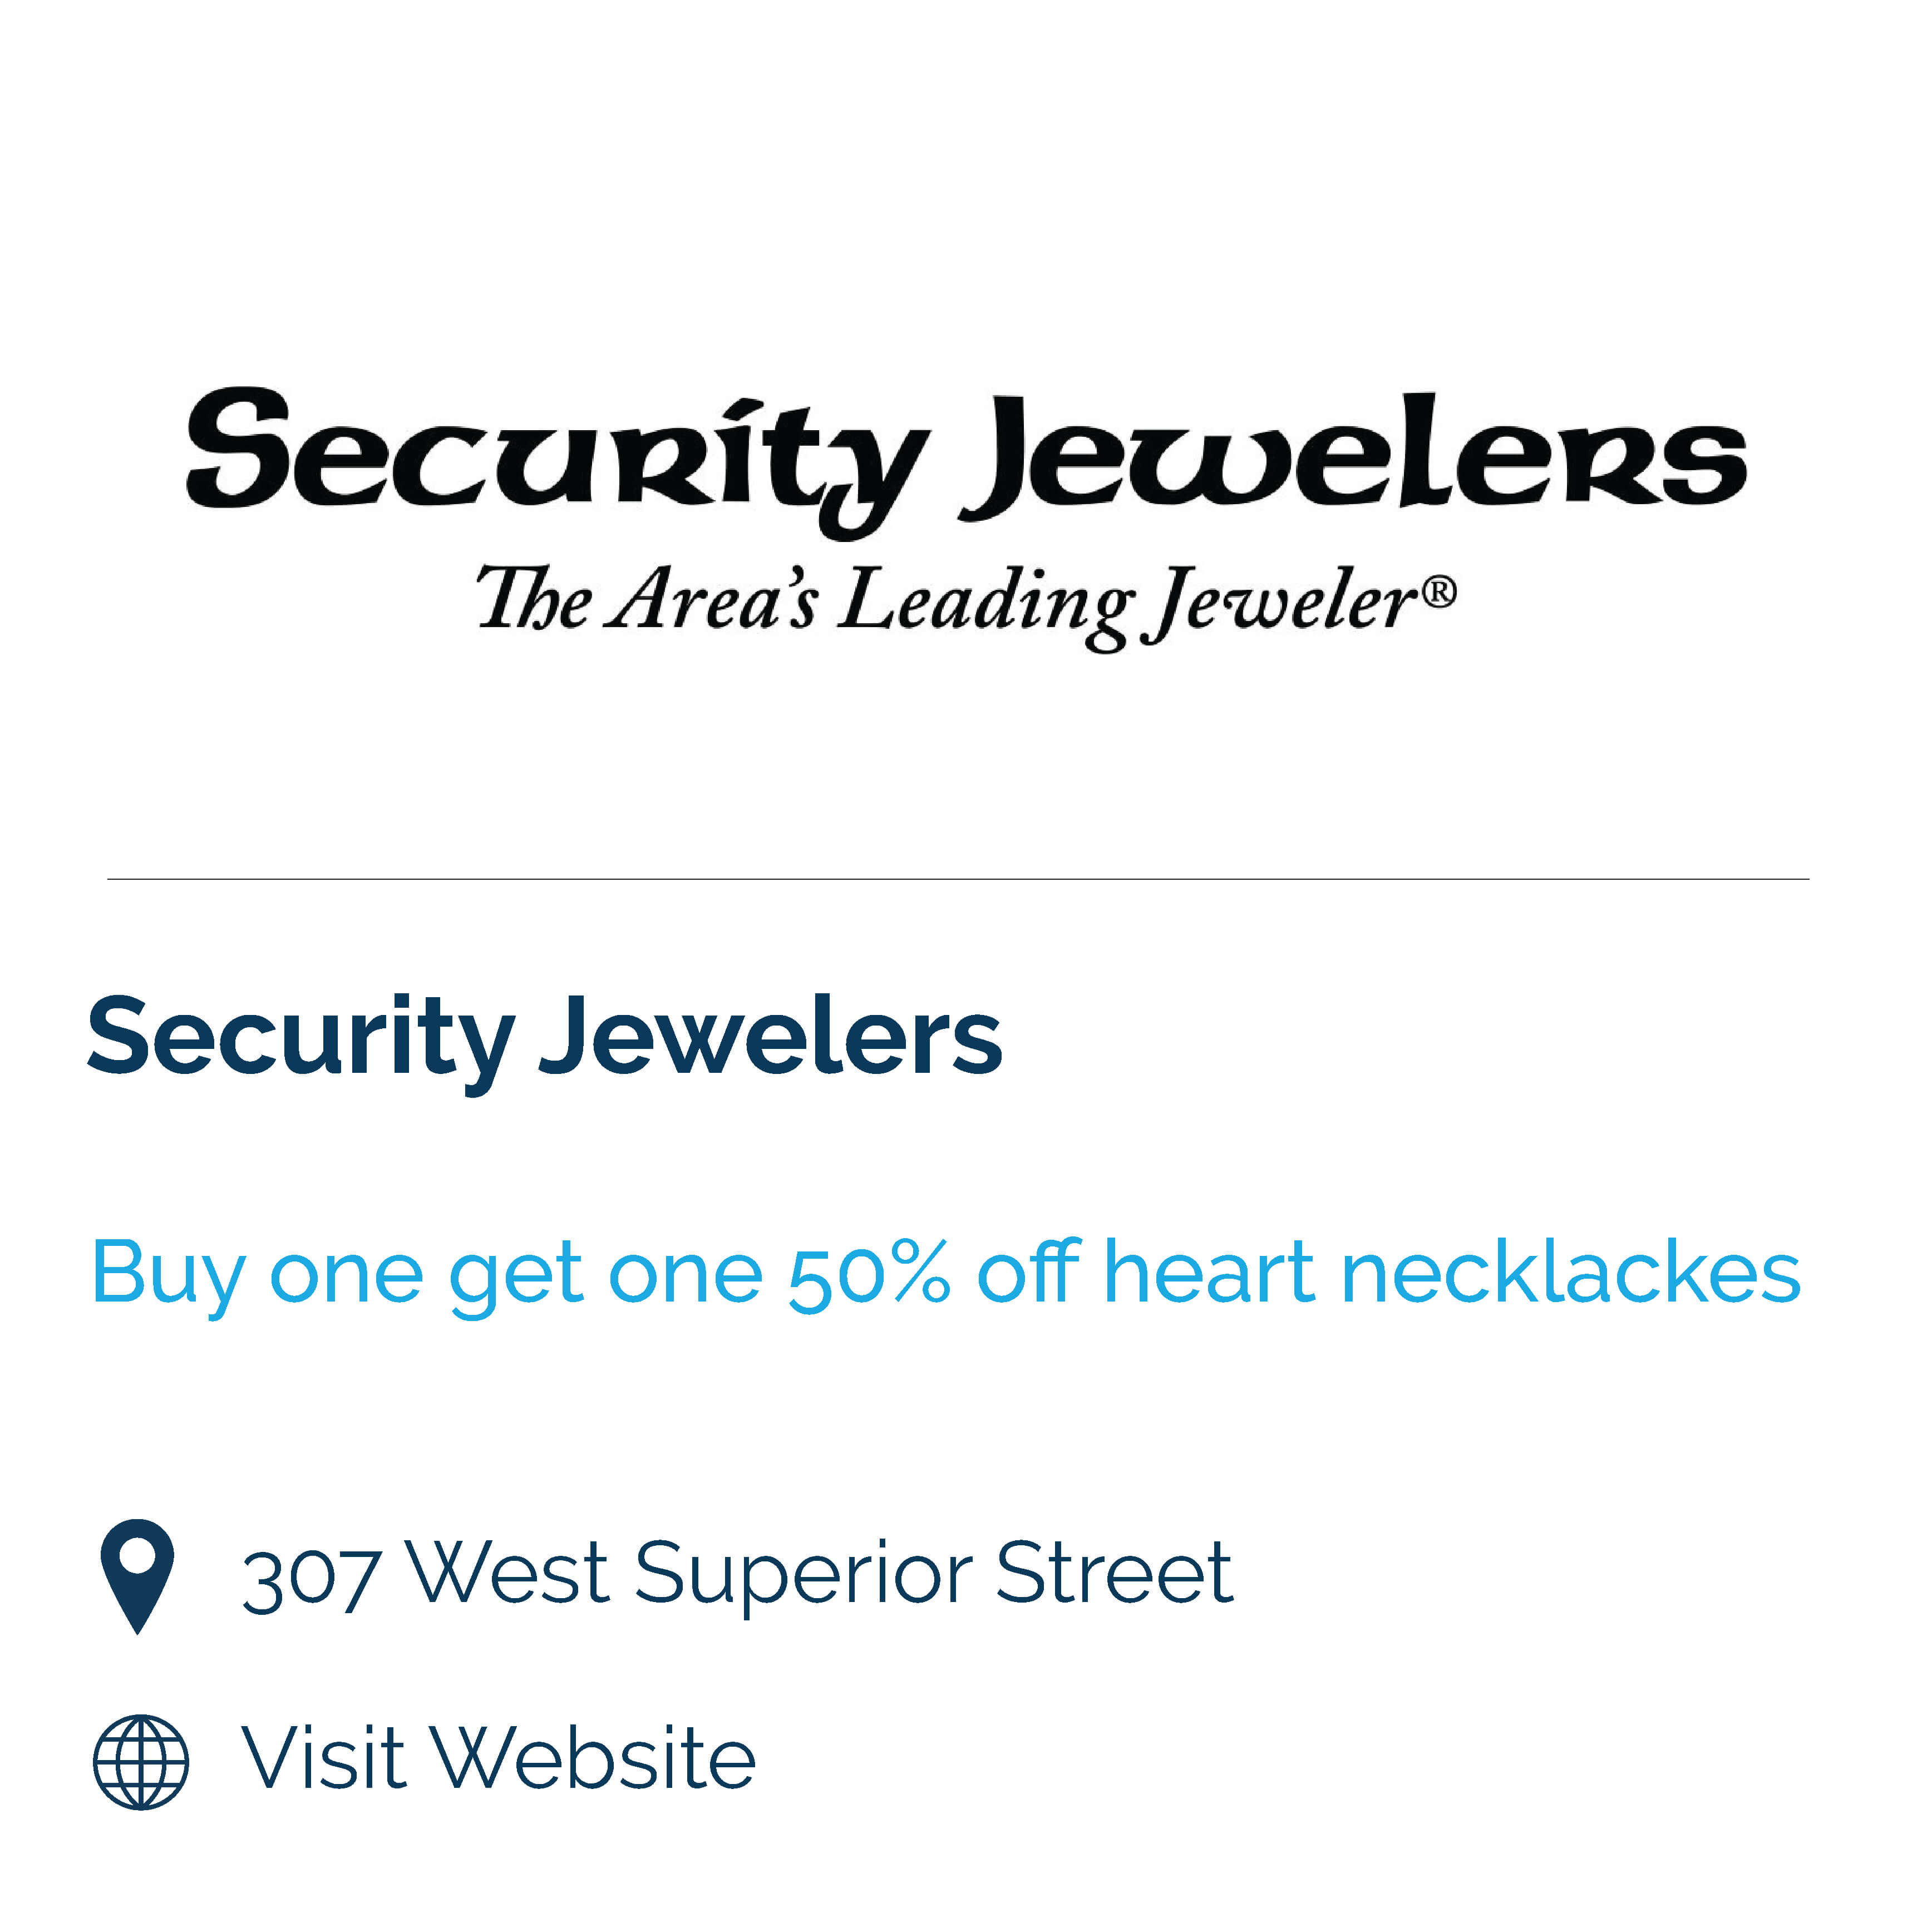 security jewelers. buy one get one 50% off heart necklaces. 307 west superior street